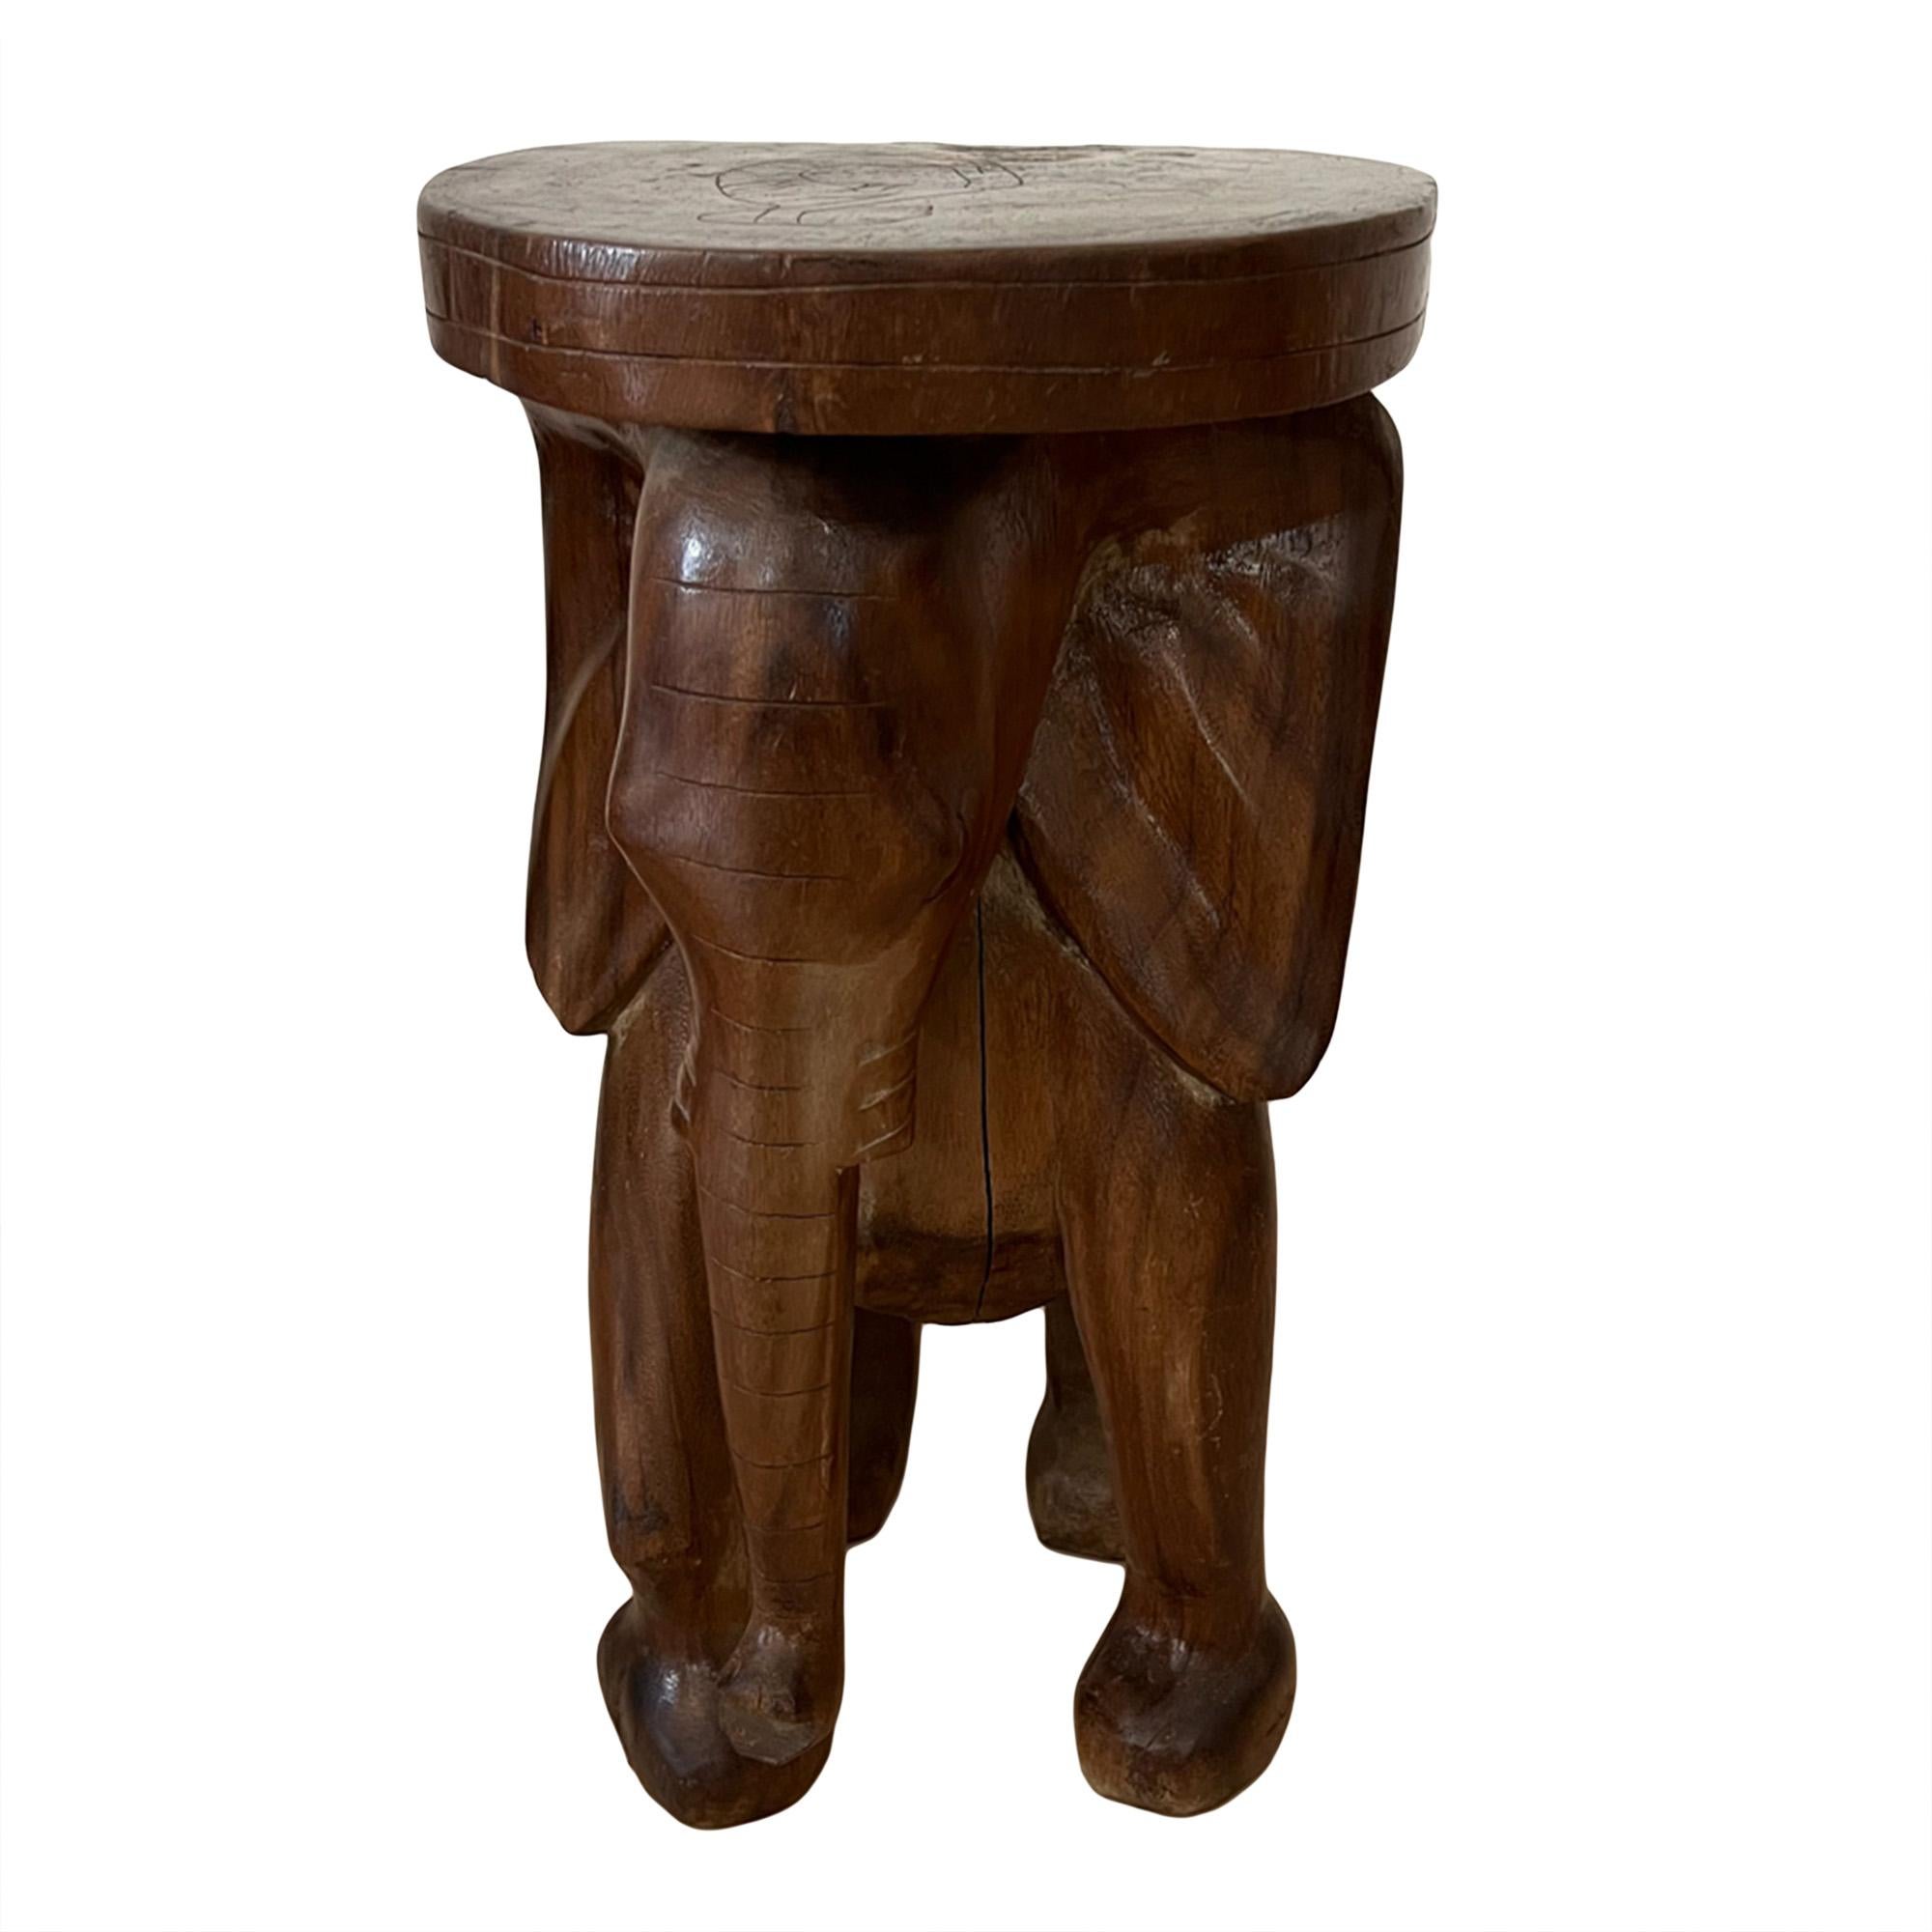 This quirky side table was carved from padauk wood in Ceylon in the 1950s. 

Please take a look at all the pictures to see the detail of the large elephant - decorative and practical!